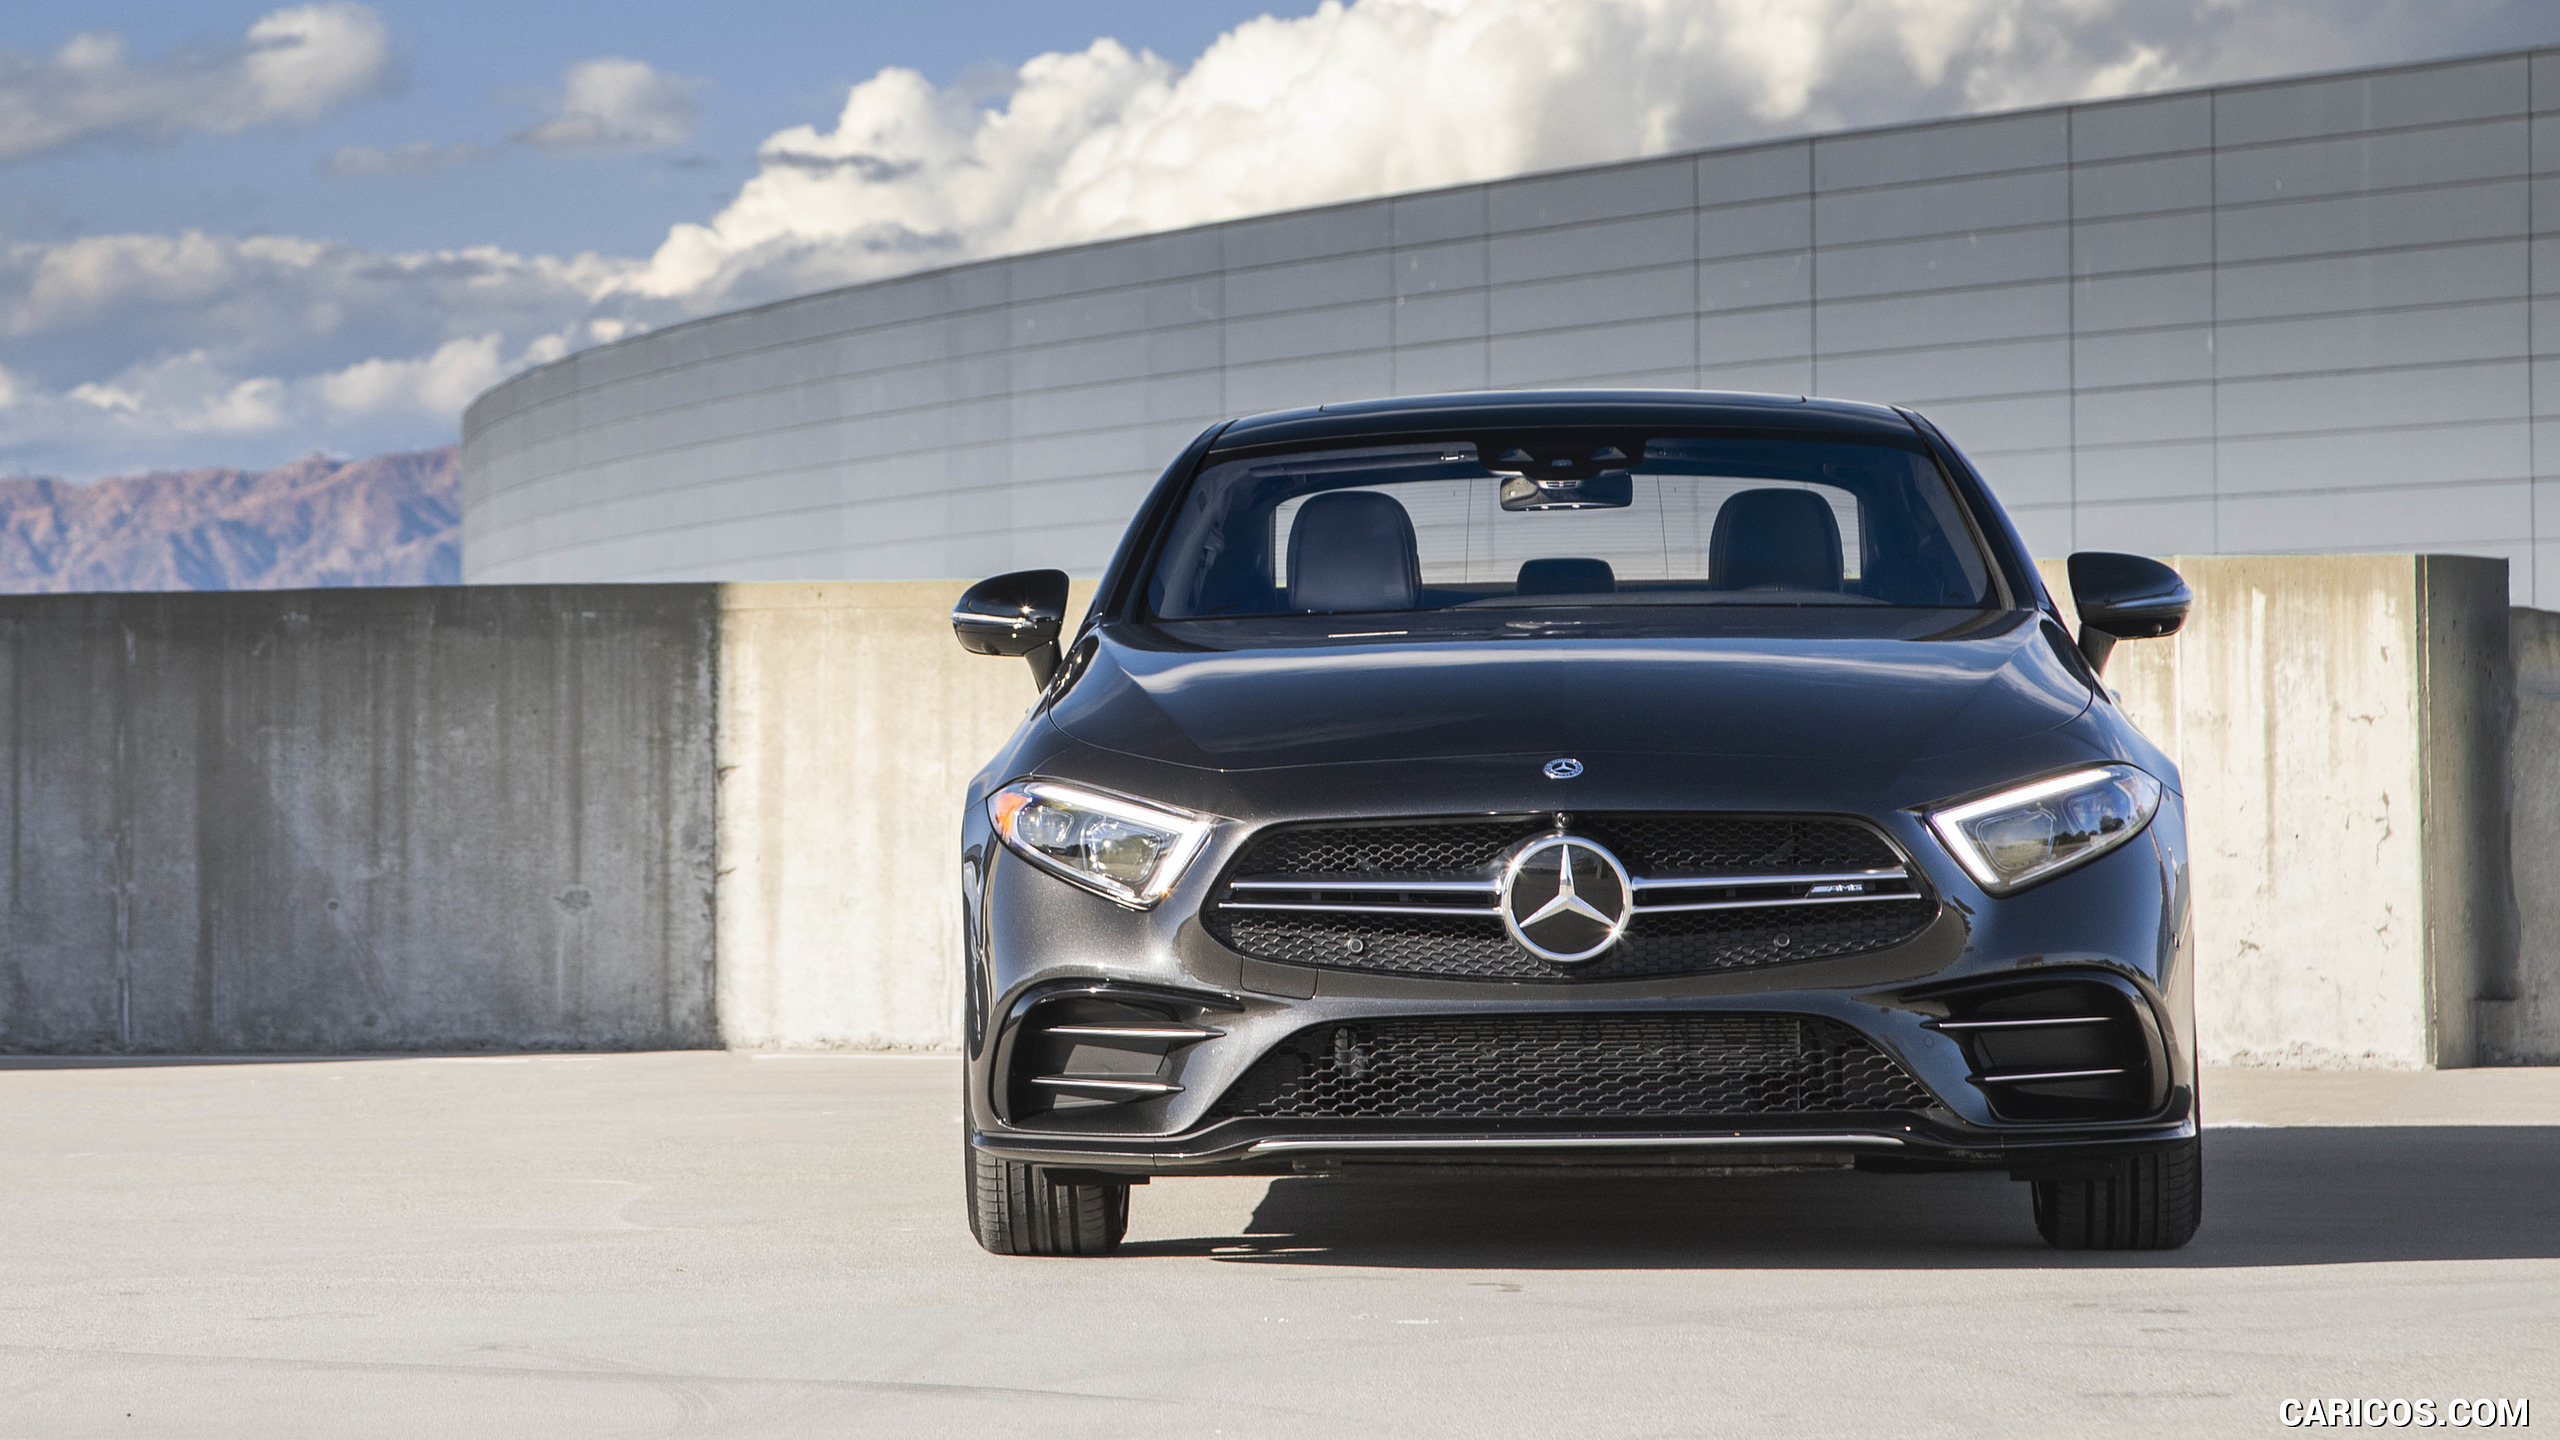 2019 Mercedes-AMG CLS 53 4MATIC+ (US-Spec) - Front, #45 of 84